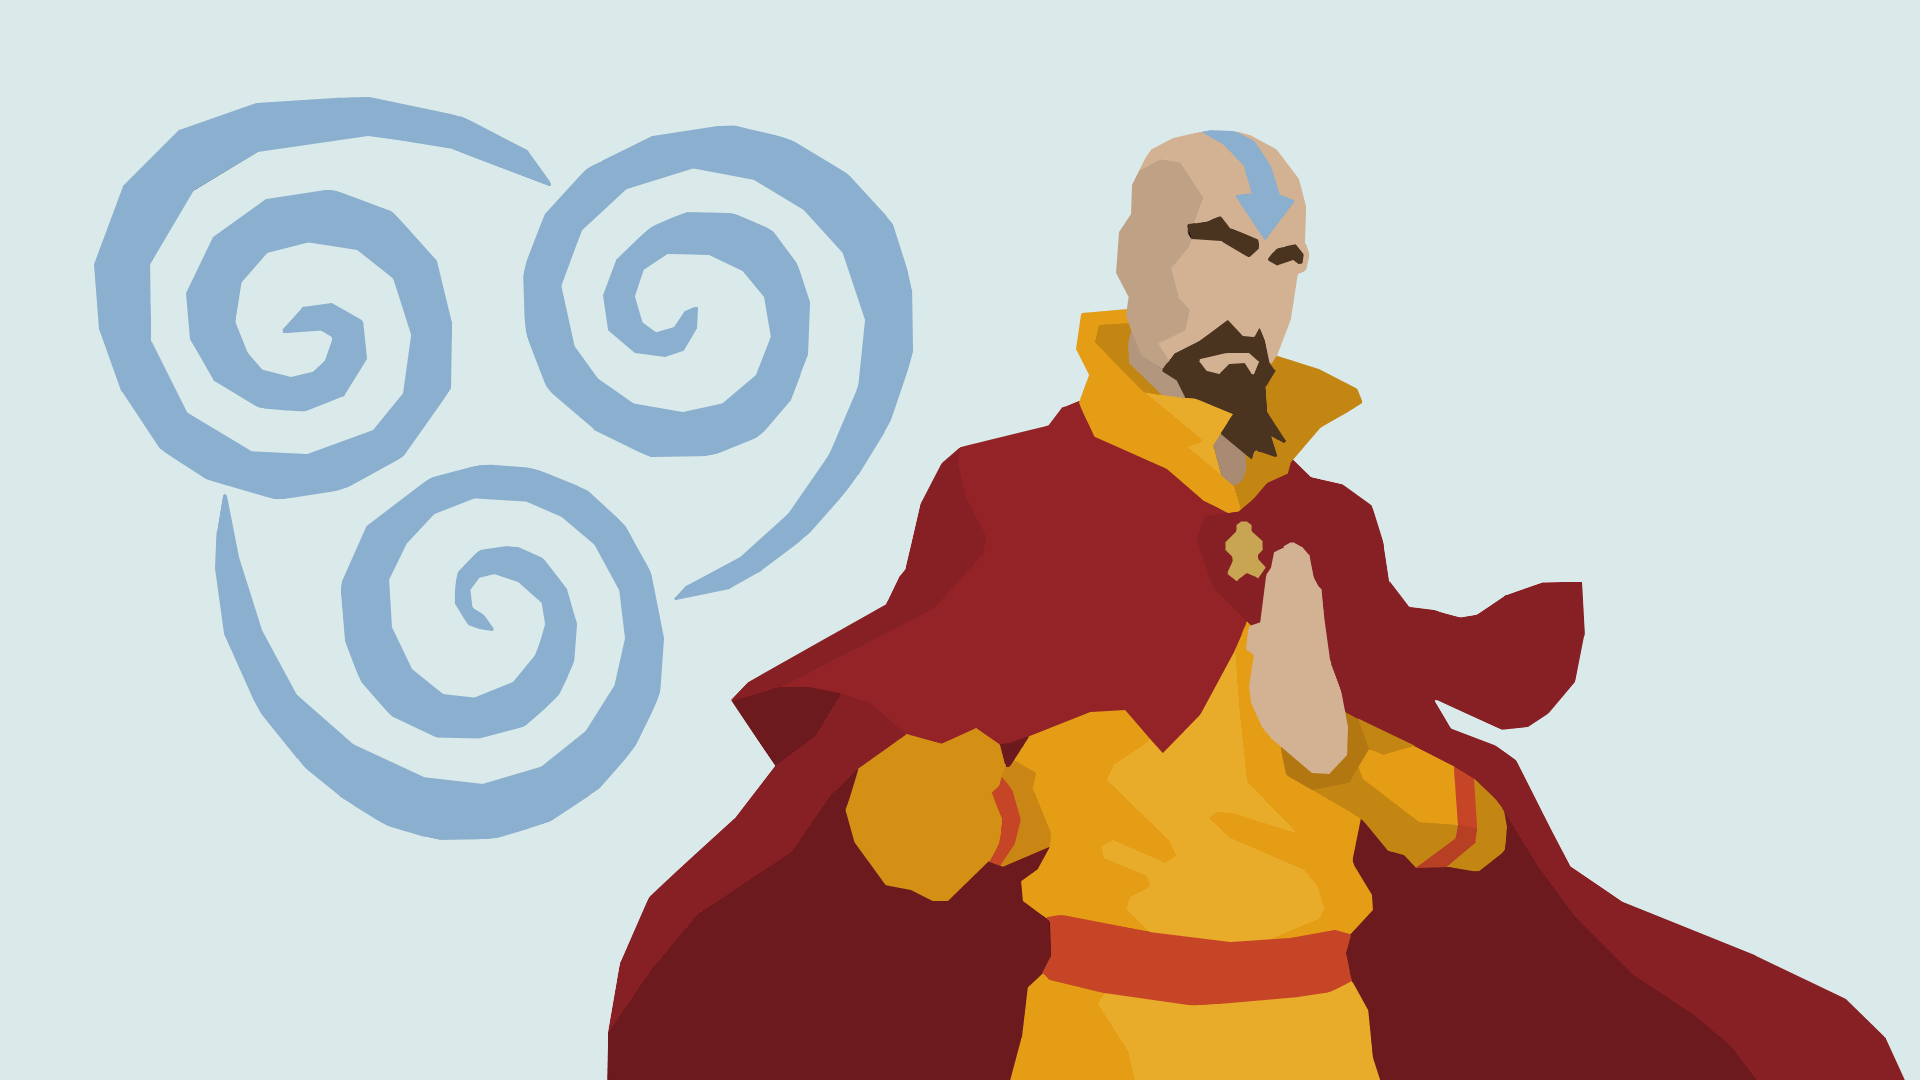 I Was Inspired By U NIghttimeDrives Post A Few Days Ago So I Tried To Make My Own. Tenzin Wallpaper 1920x1080 You Can Leave Suggestions In The Comments On Which Character I Could